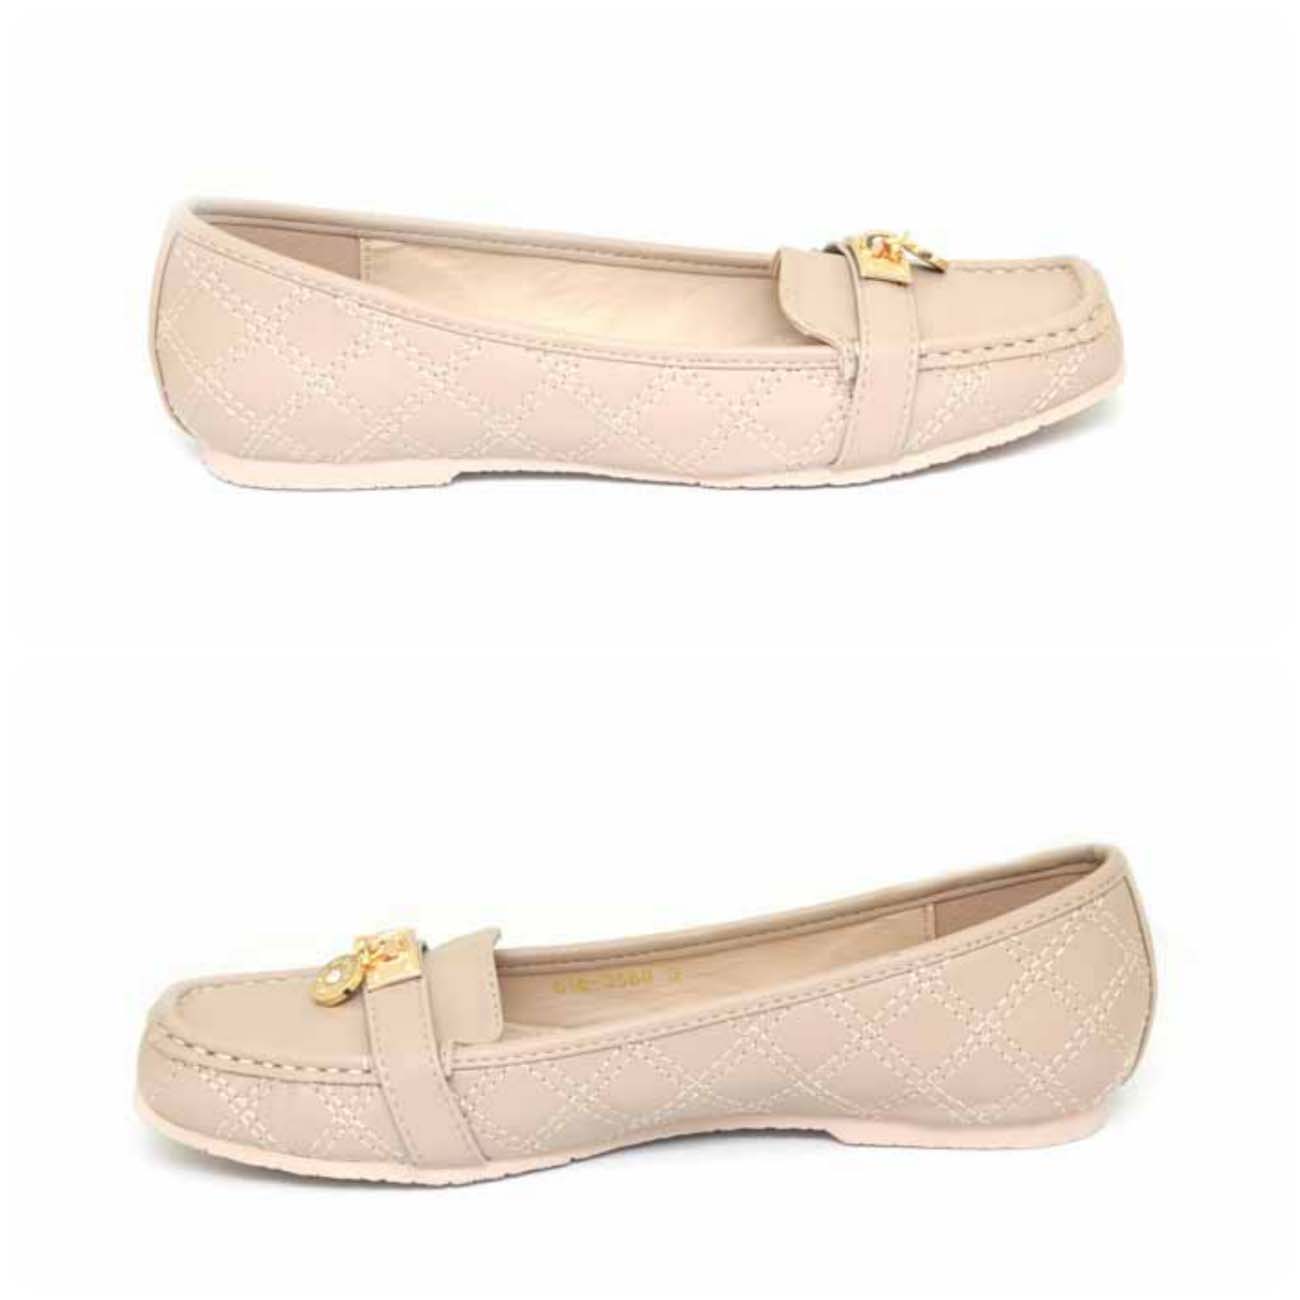 bata shoes for women price